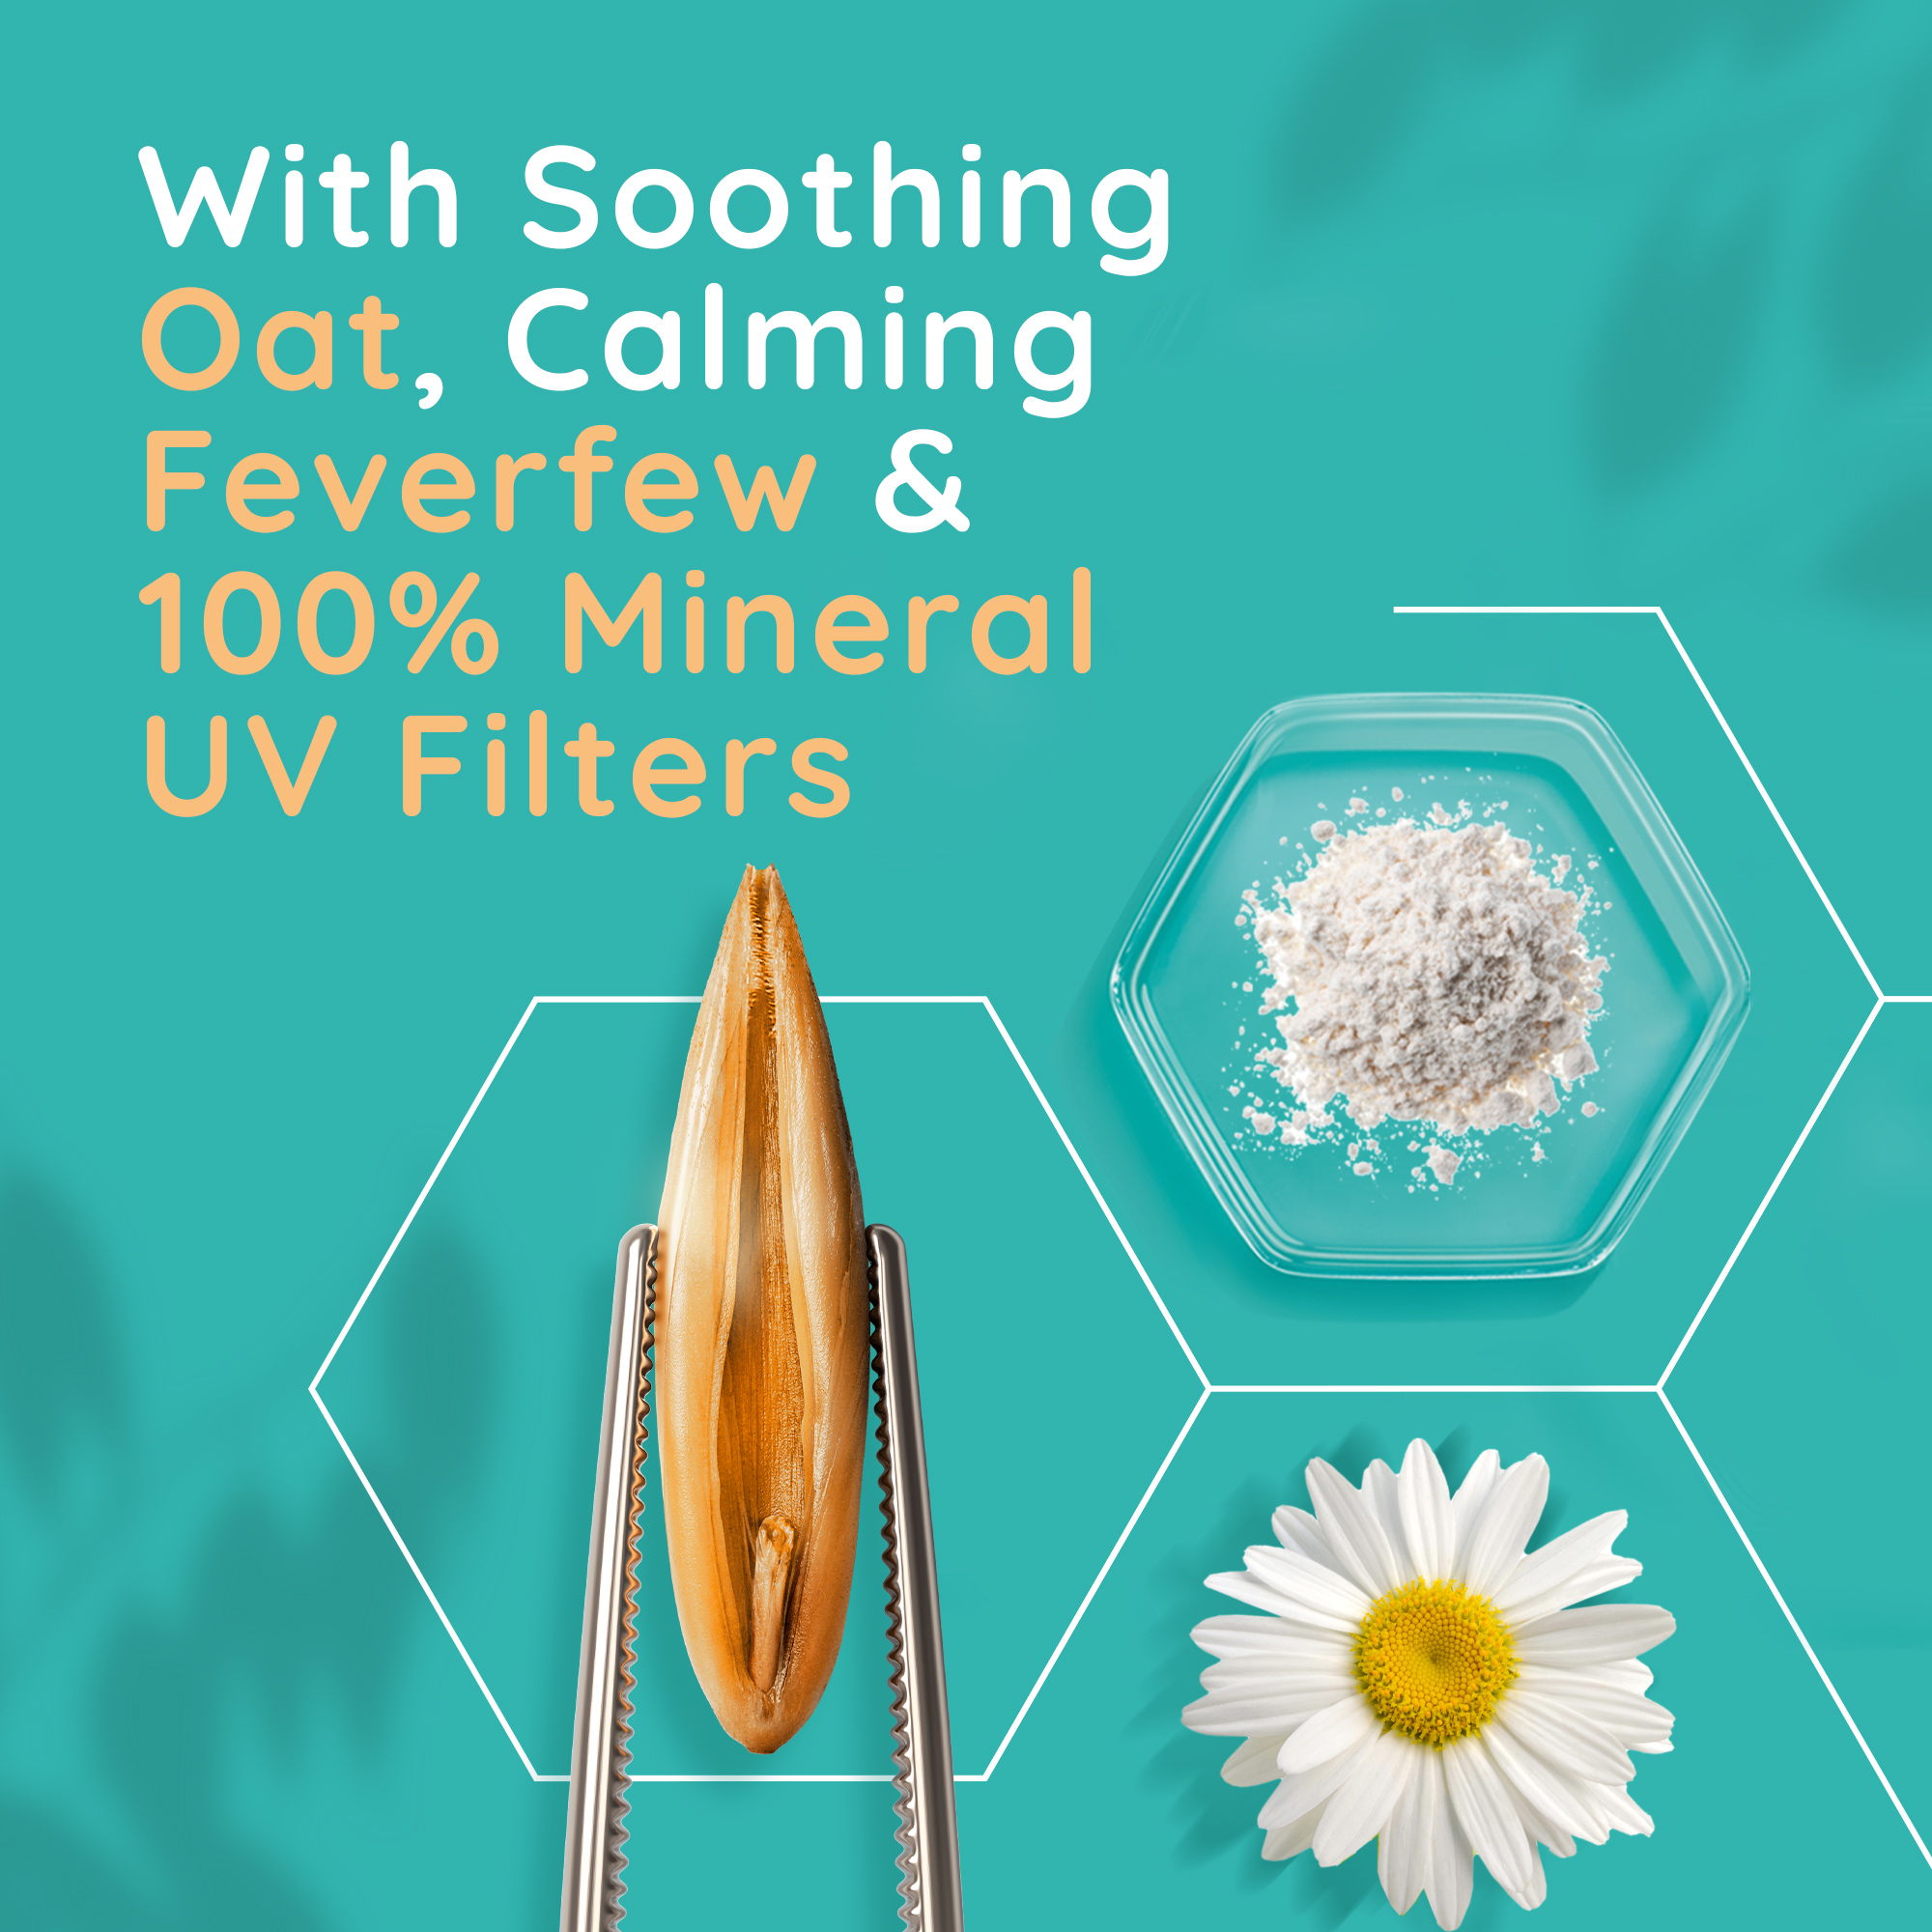 with soothing oat, calming feverfew & 100% mineral UV filters